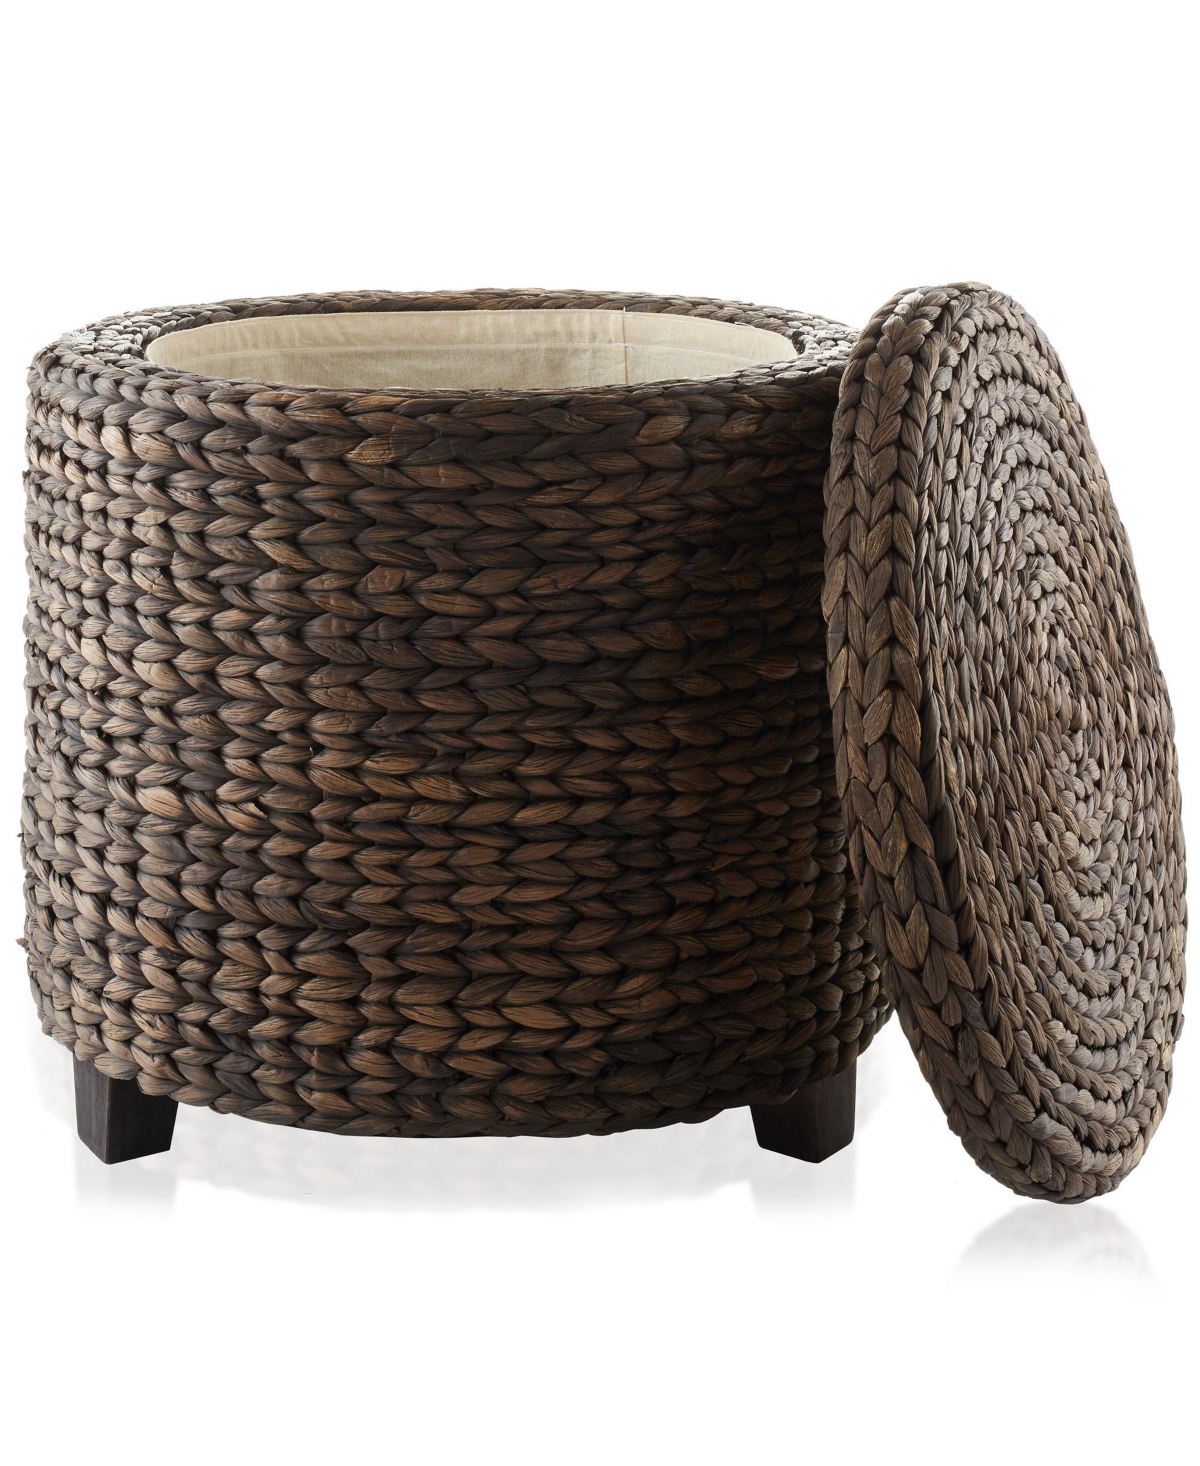 17" Round Storage Ottoman with Lid - Natural, Handwoven Footstool for Living Room, Bedroom, Bathroom, Home Office - Espresso